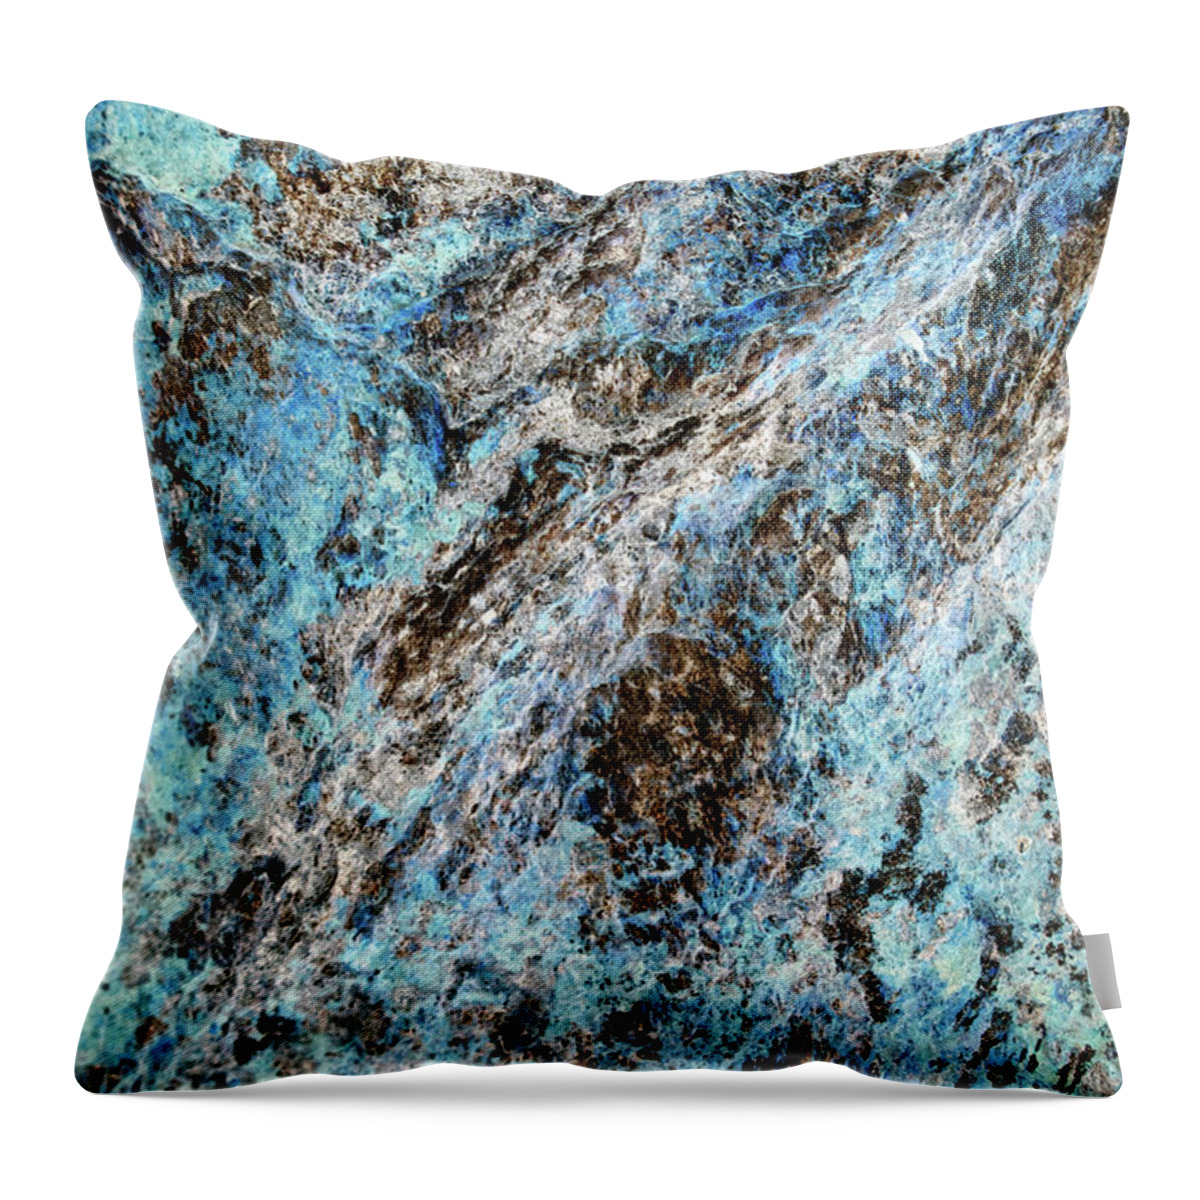 Blue Abstract Throw Pillow featuring the photograph Symphony Of Blues Abstract Art by Christina Rollo